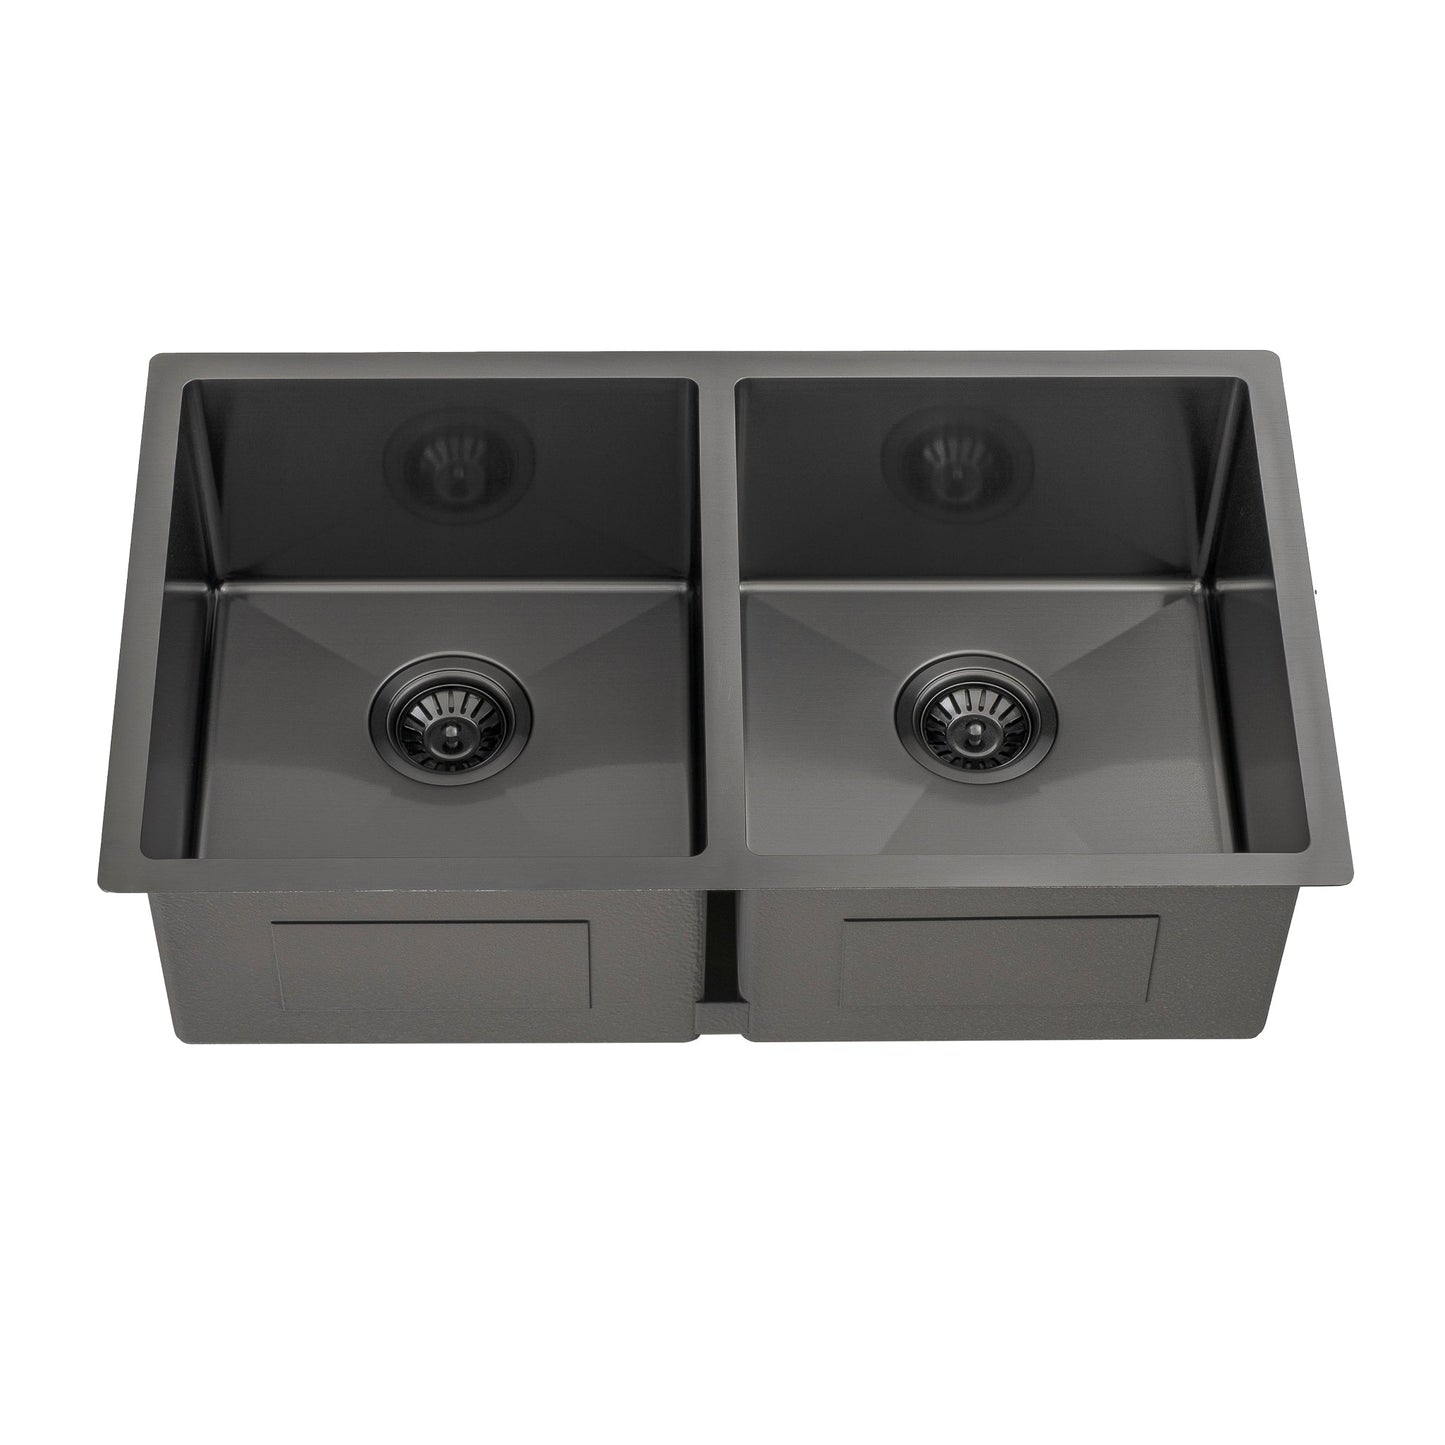 Retto II 775mm x 450mm x 230mm Stainless Steel Double Sink, Brushed Gunmetal Black